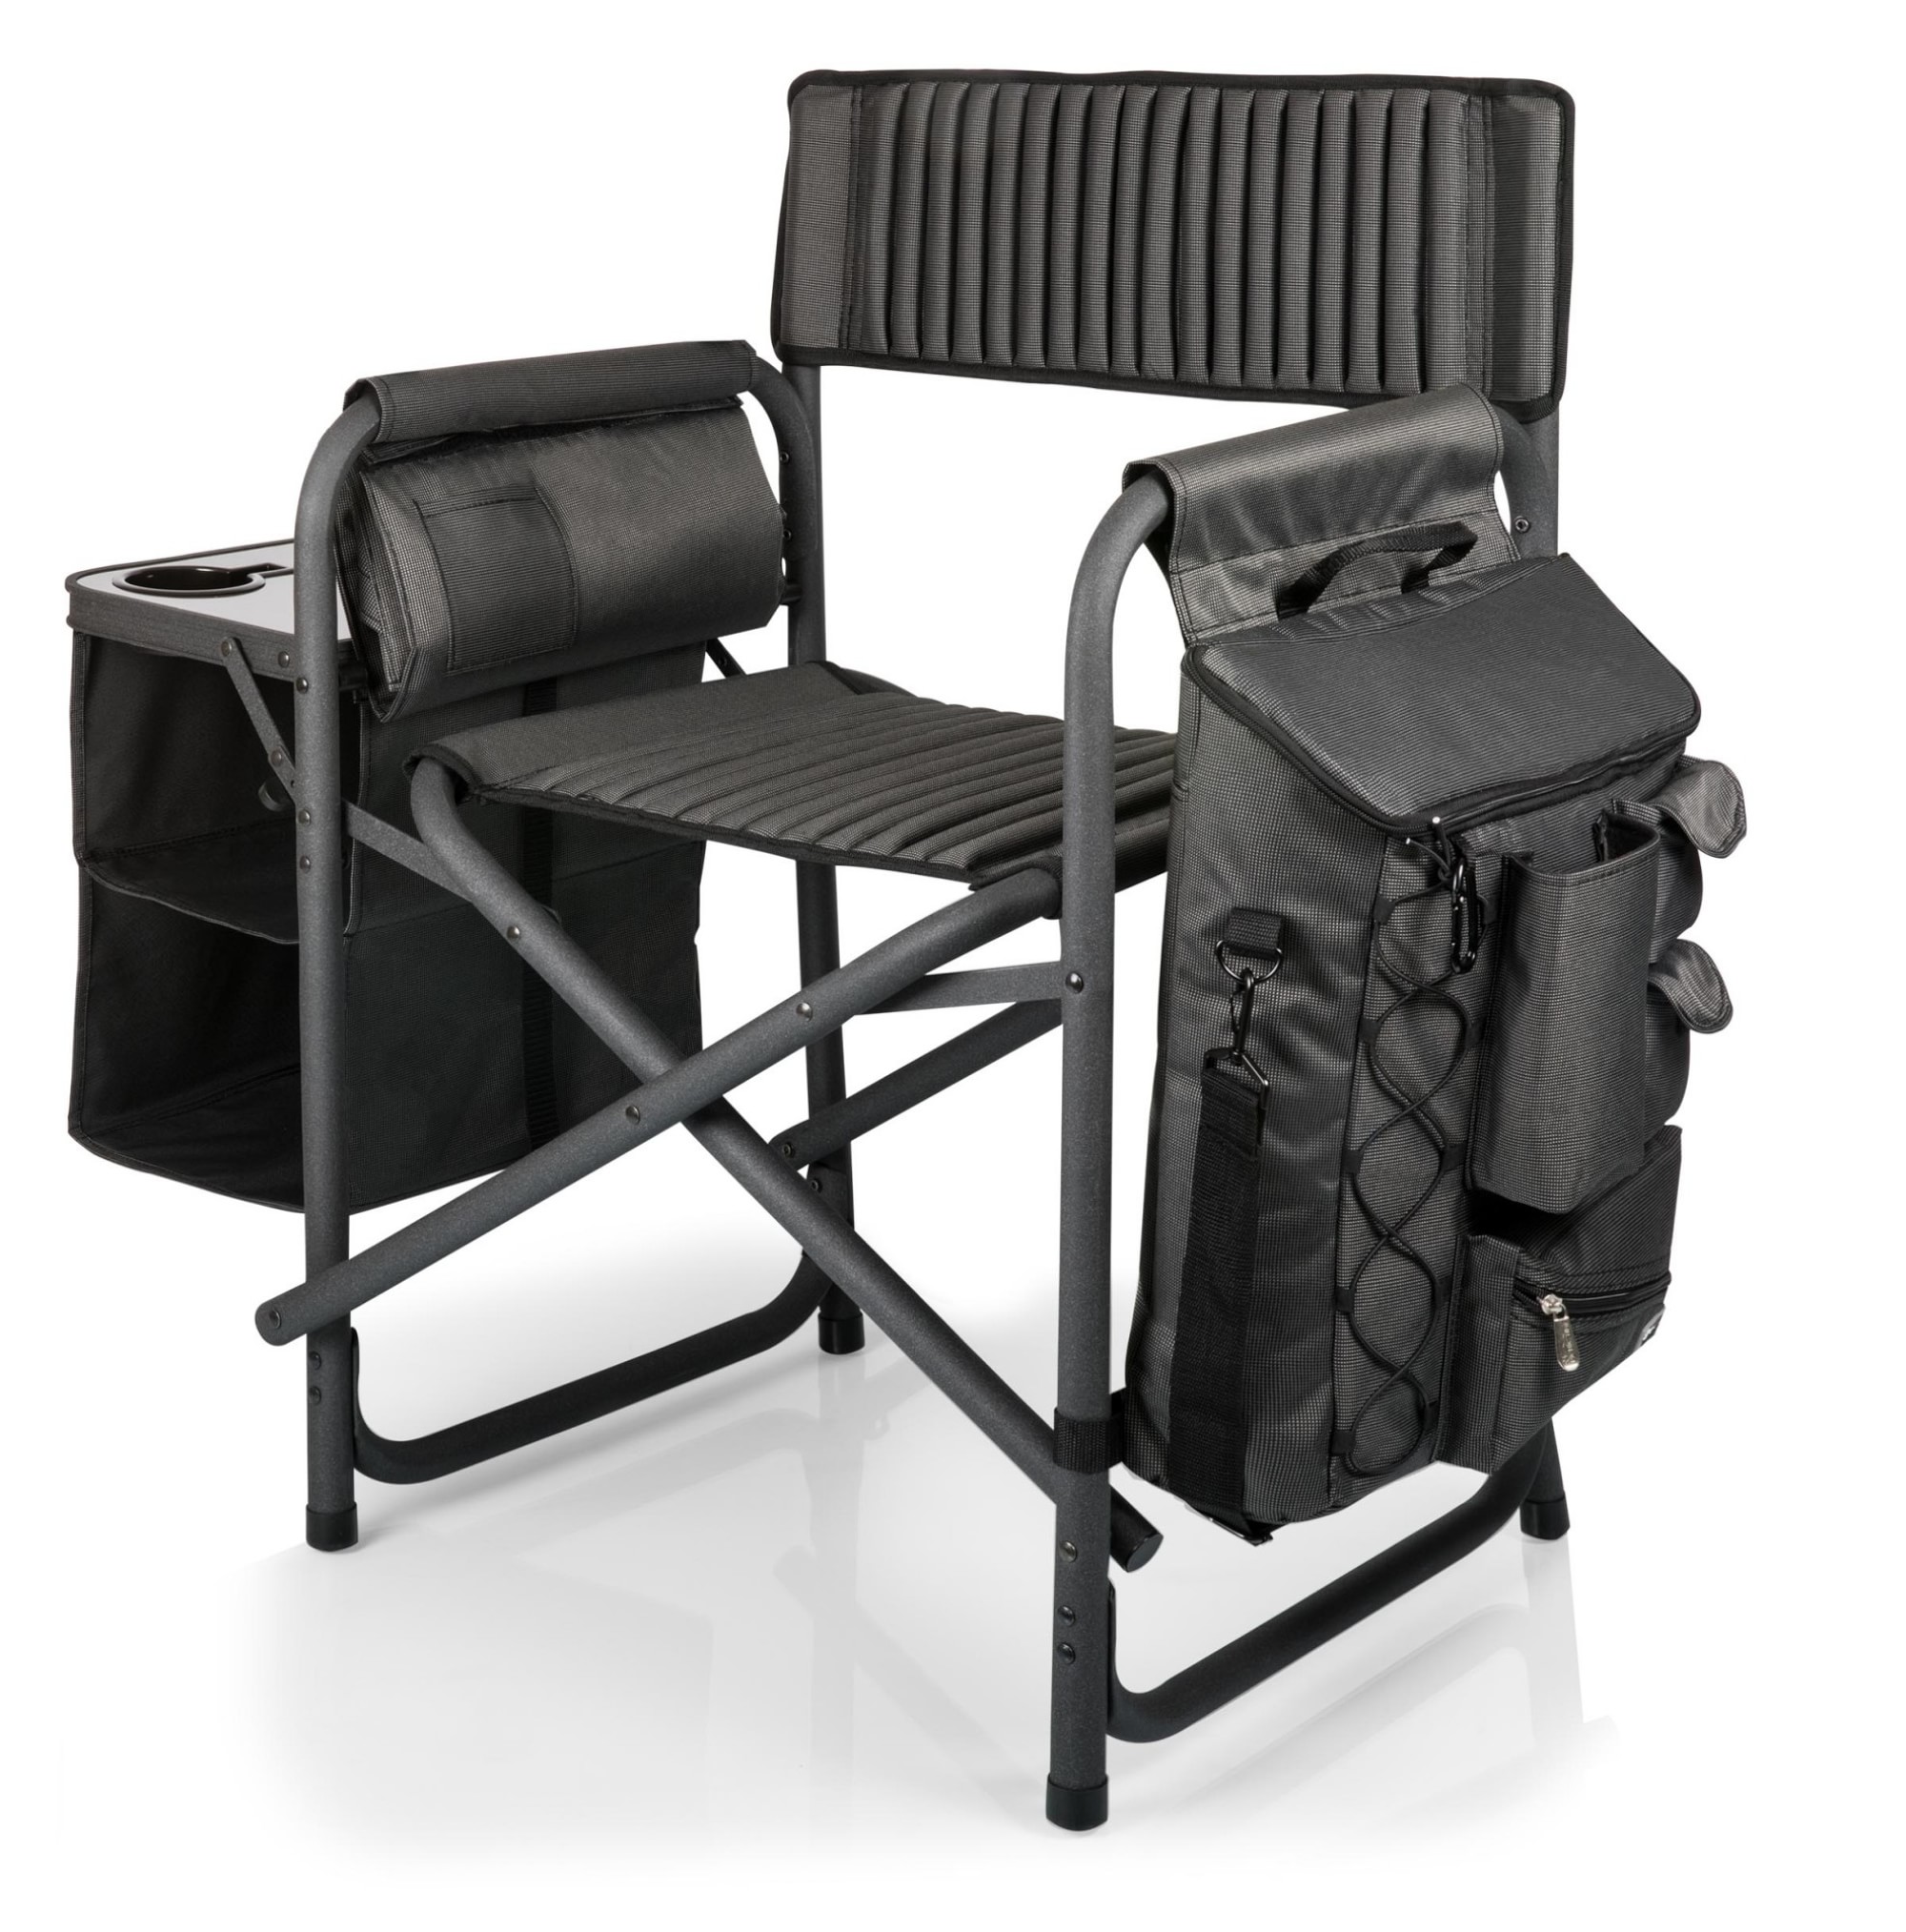 Positano Backpack Chair with Cooler